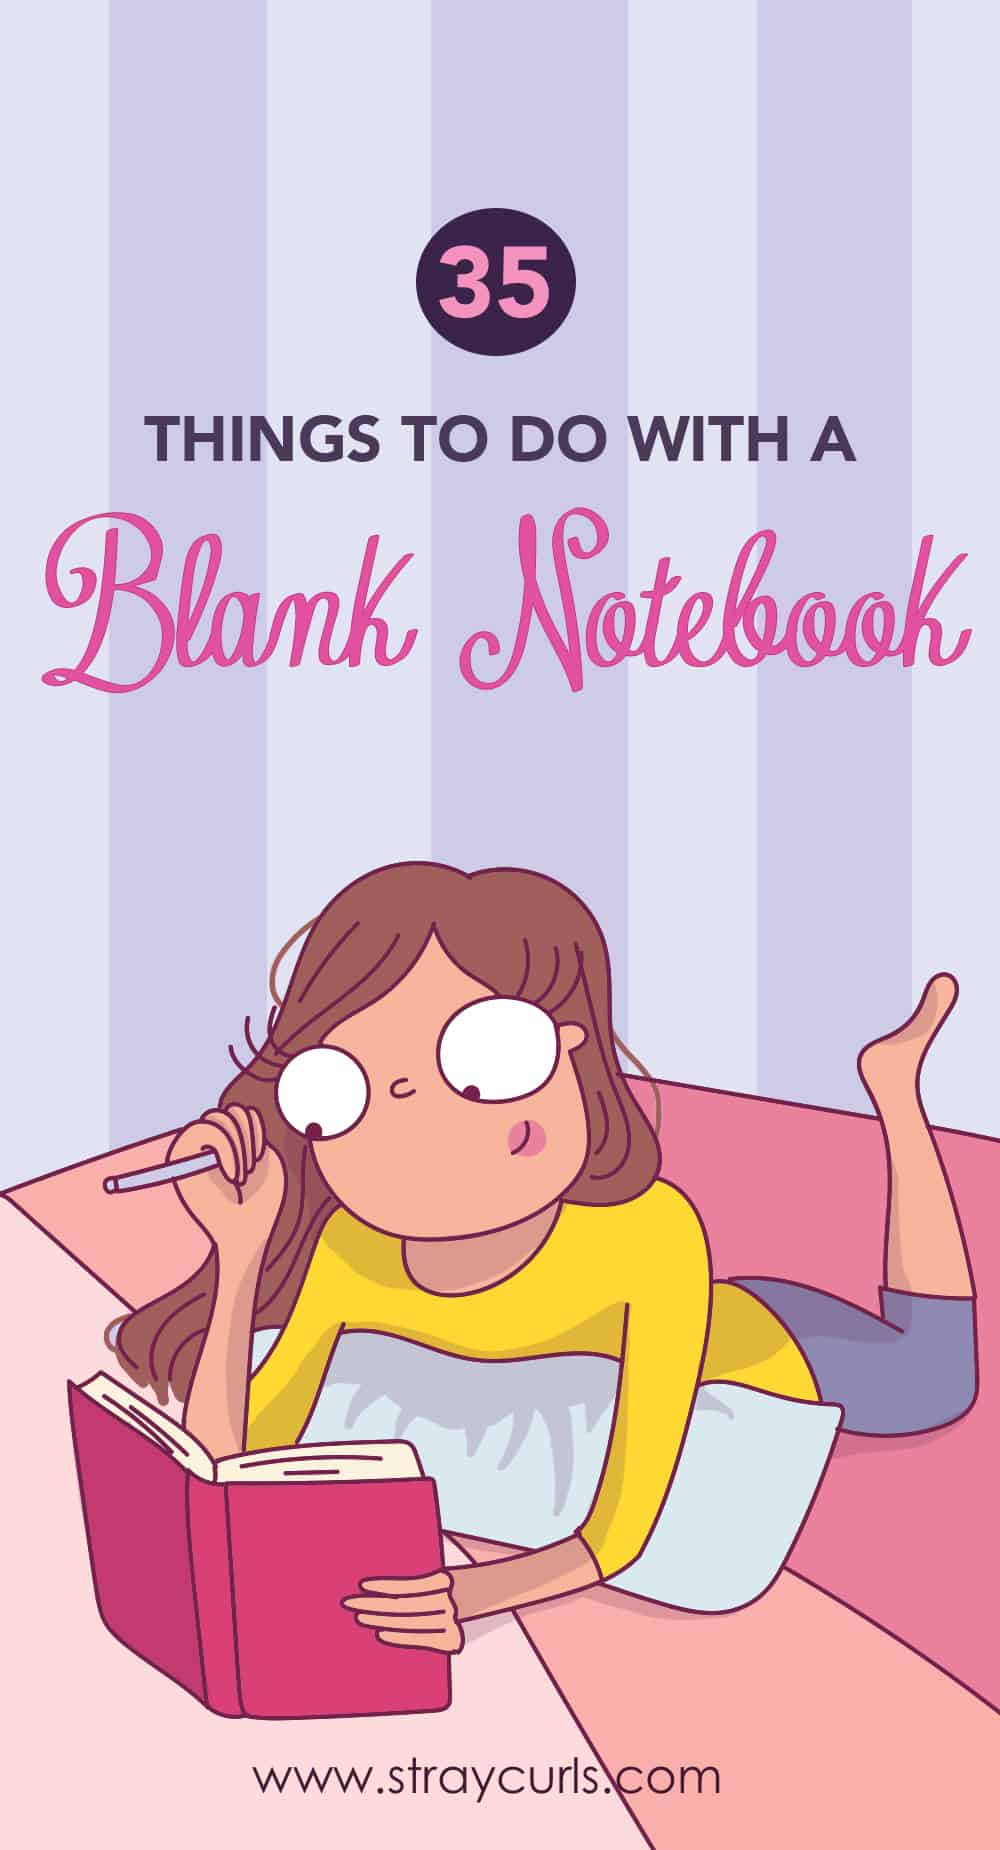 Read to know what to do with a blank notebook. This post has ideas to fill your blank notebook with. You can journal, doddle, make a scrapbook, write down song lyrics, use it as a travel journal and so much more! #notebook #diy #crafts #pages #art #crafts